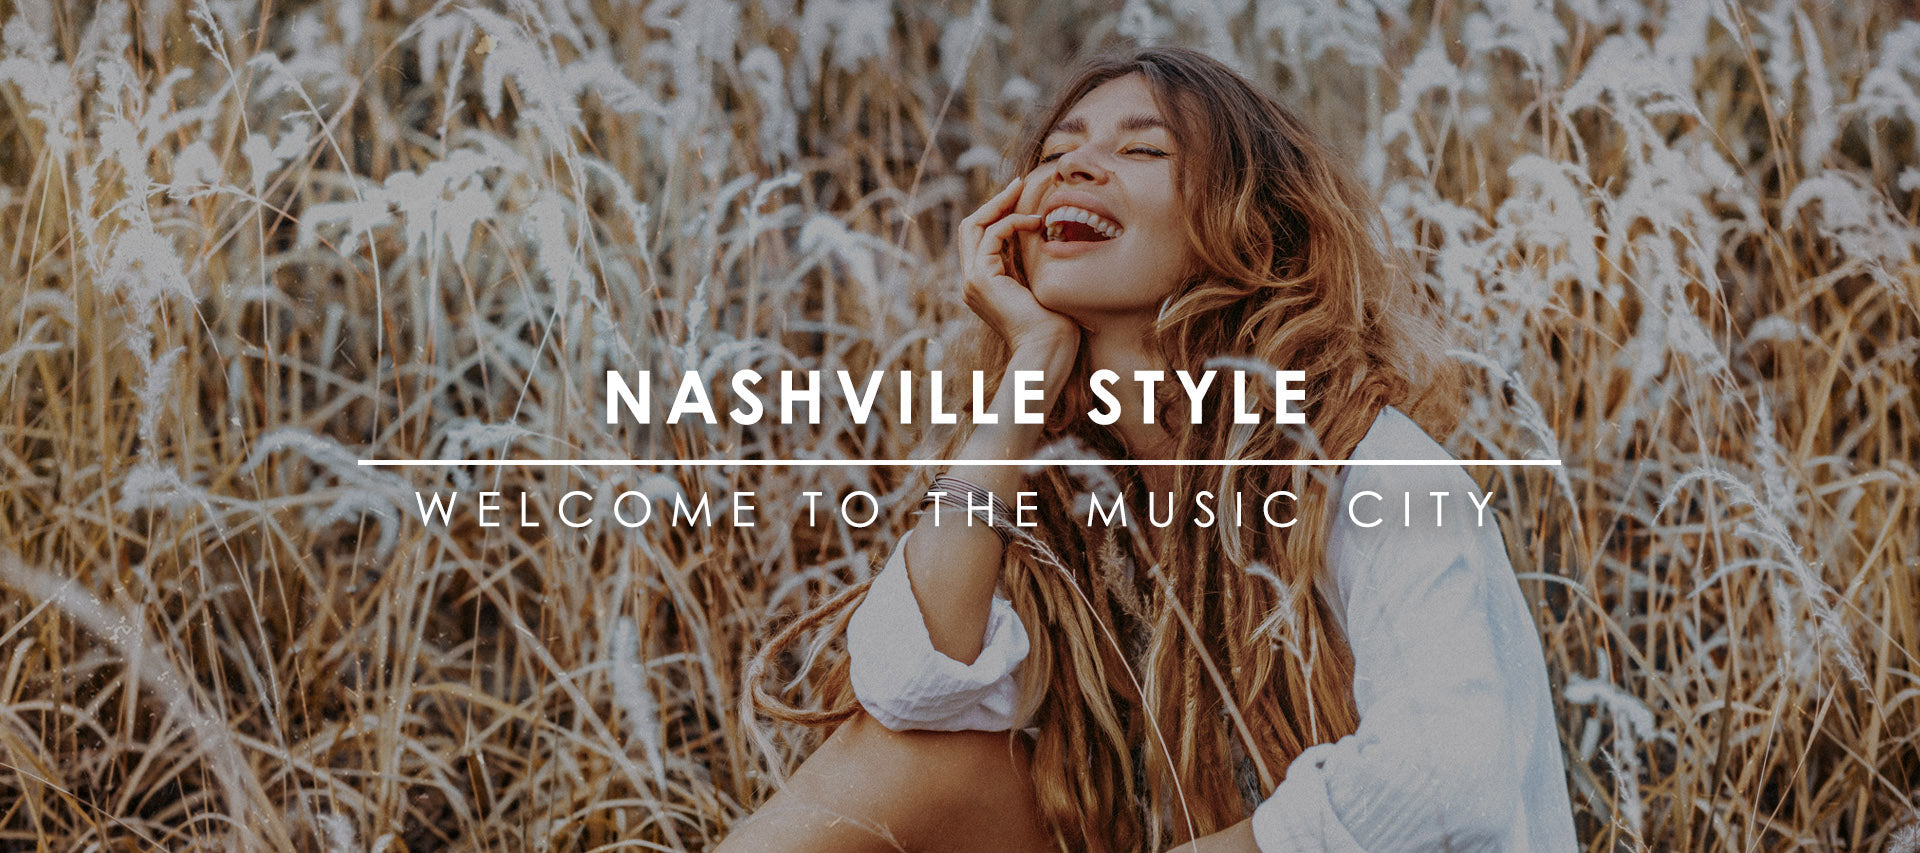 Nashville Style - Welcome to the Music City by Roam Often